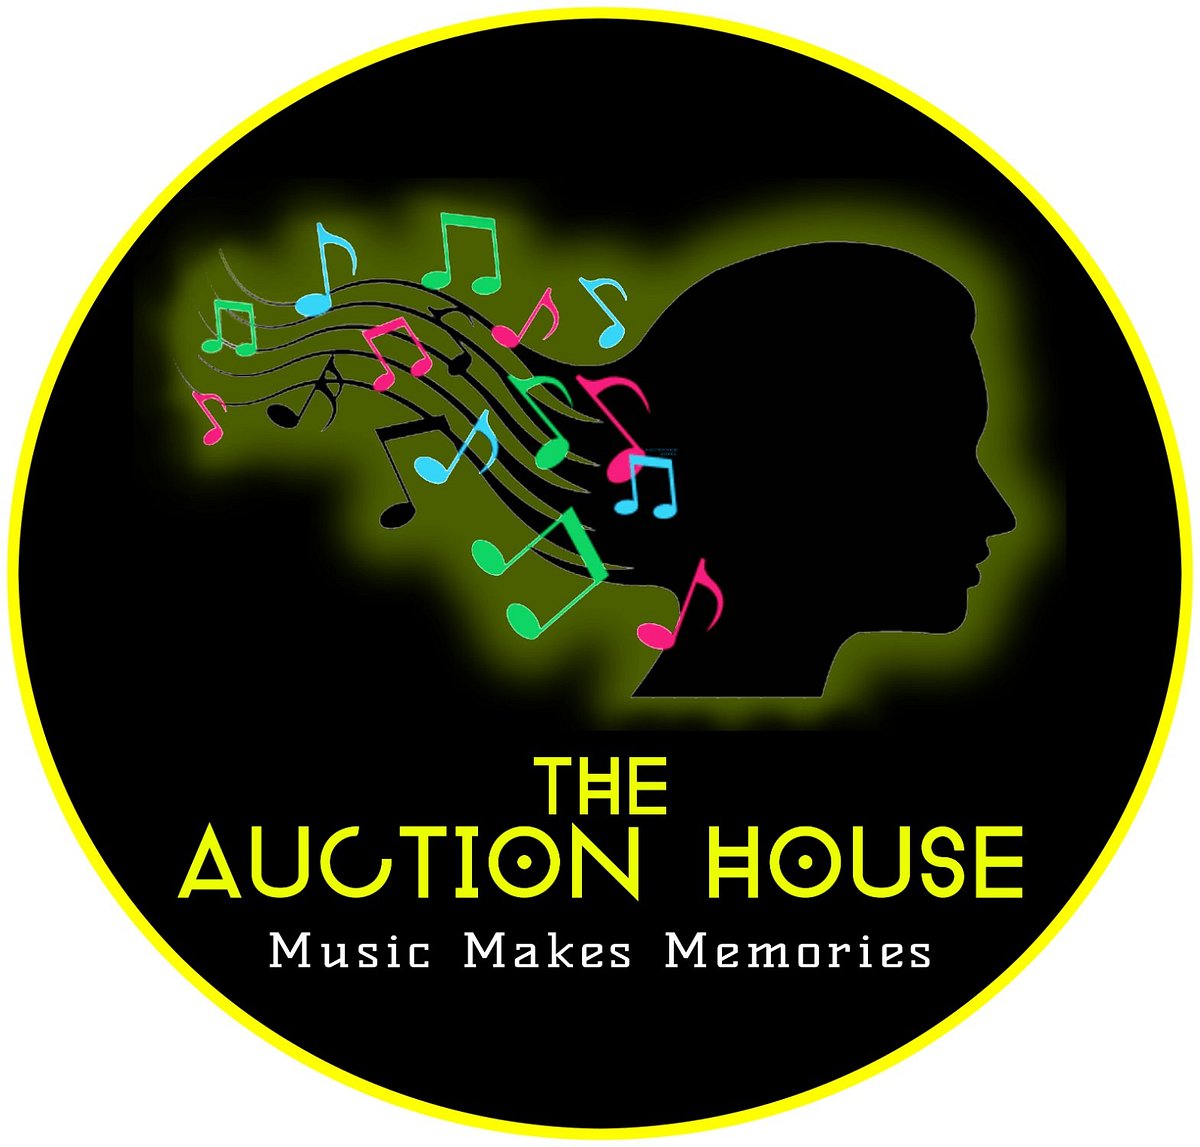 The Auction House - Music Makes Memories (Berwick upon Tweed) - All You ...